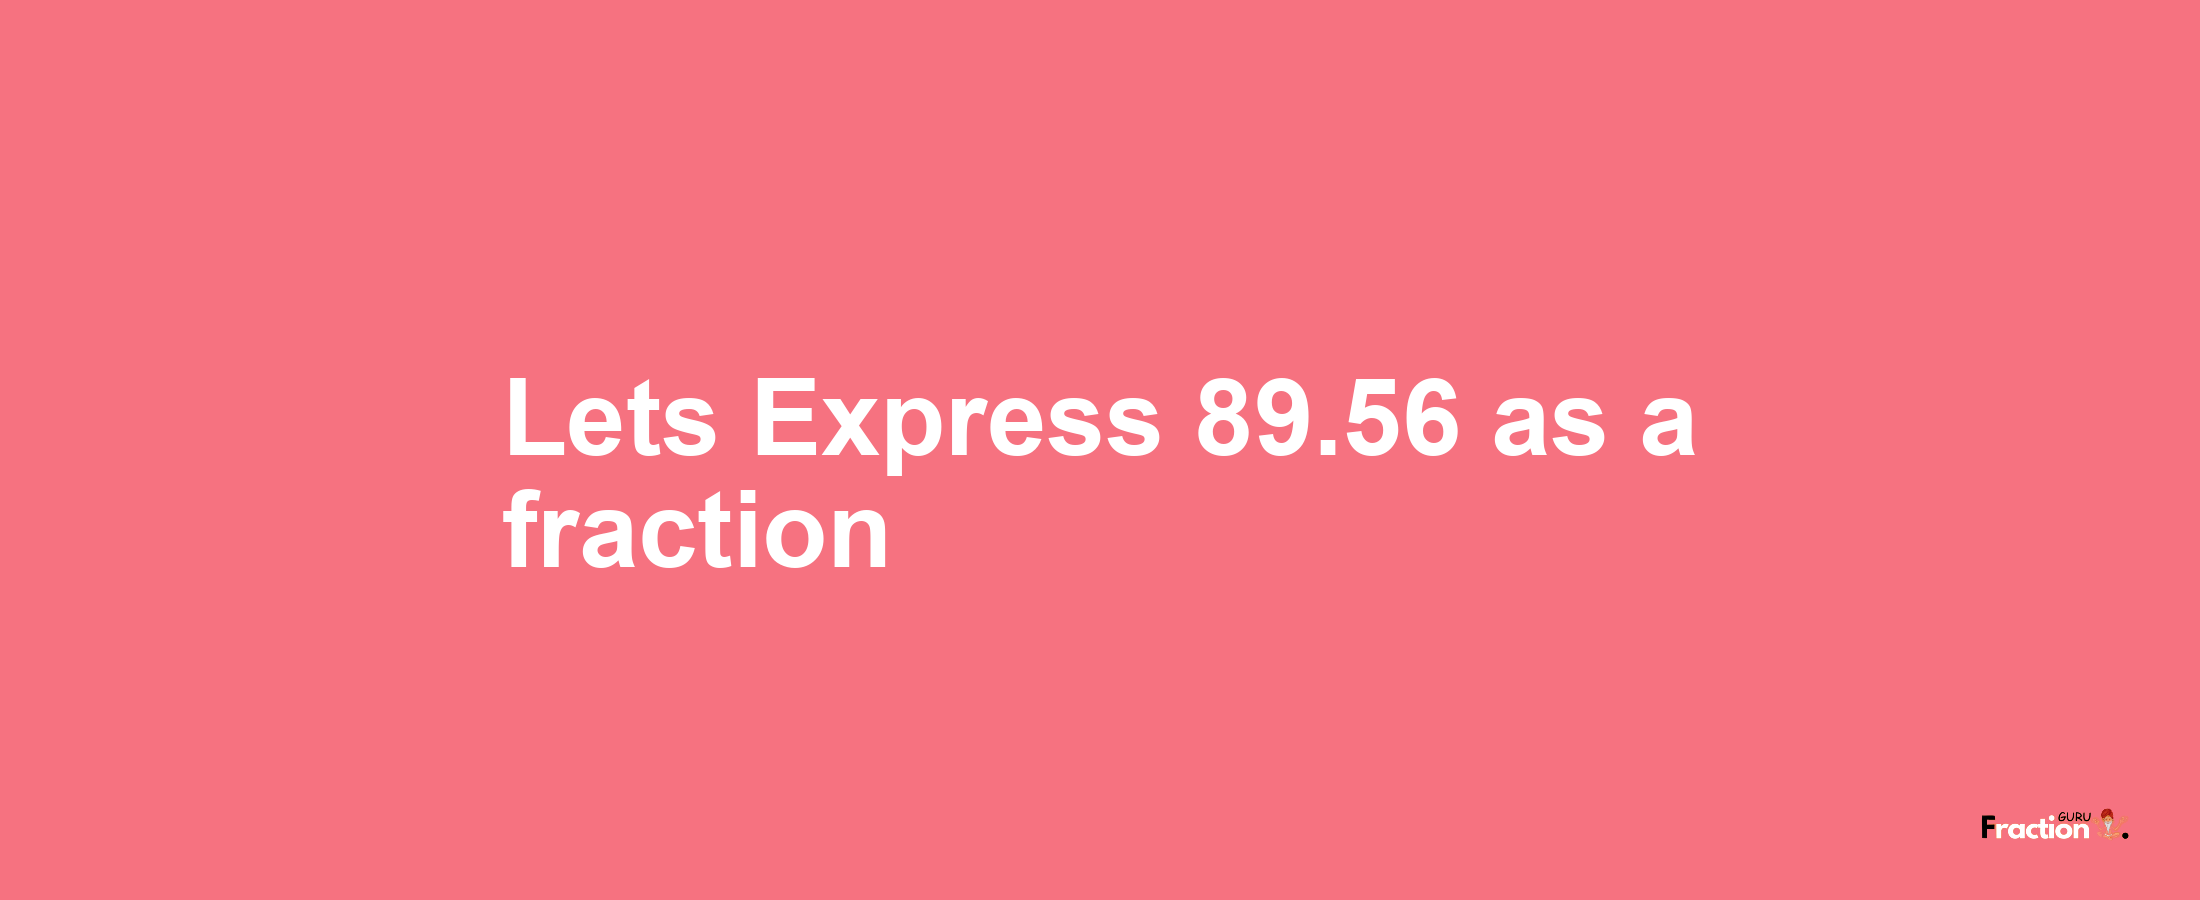 Lets Express 89.56 as afraction